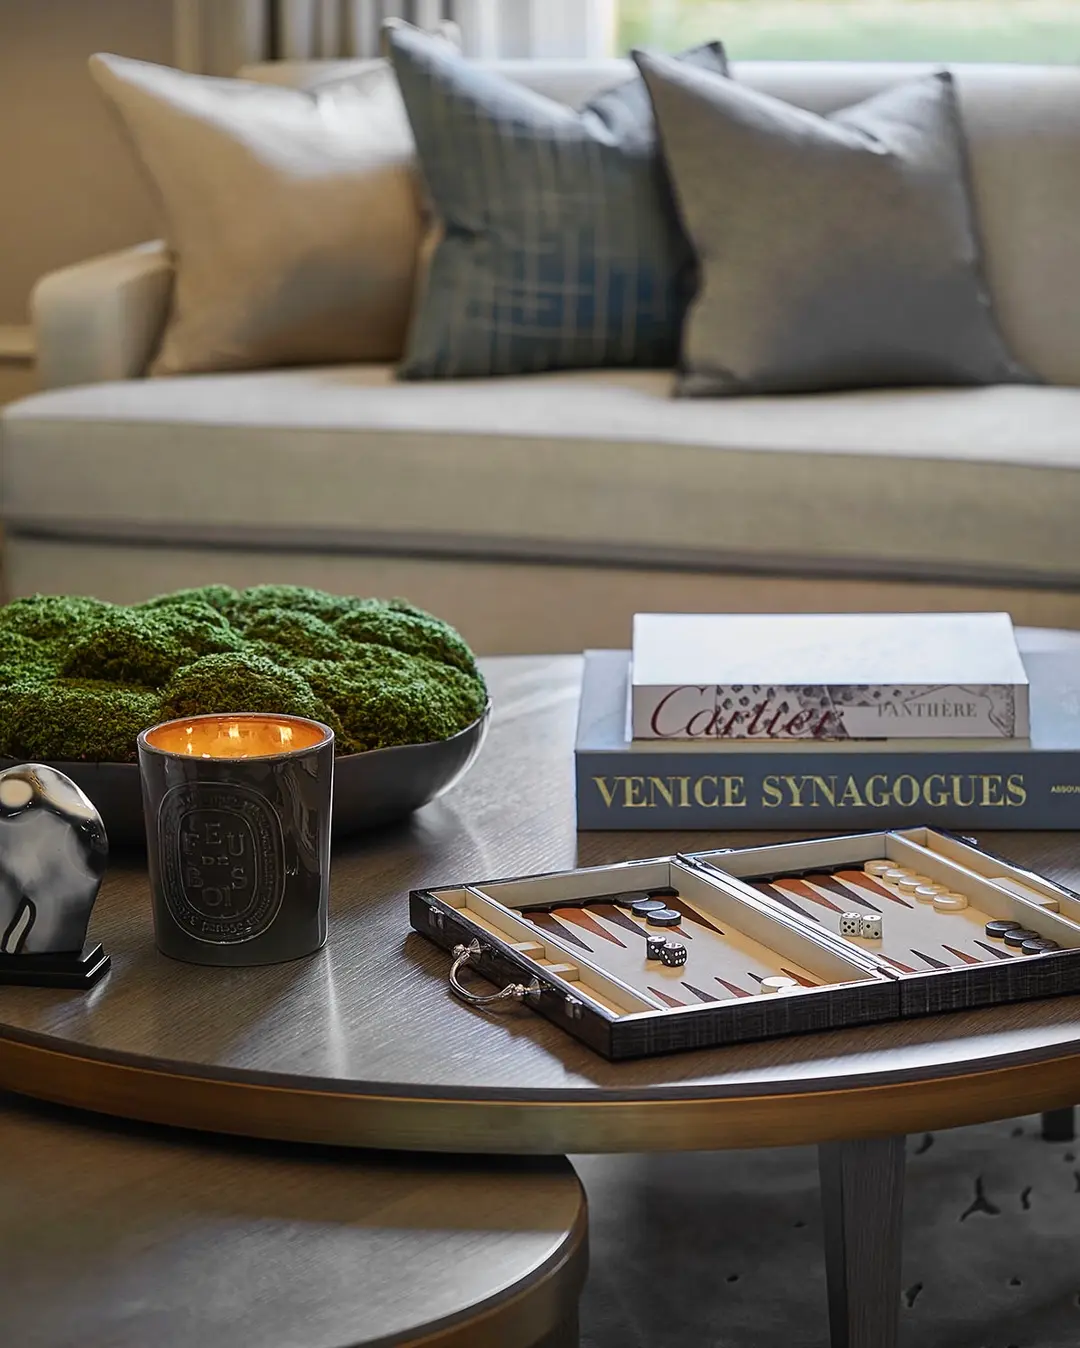 styling a coffee table can be as simple as using personal items or interest such as a game board.